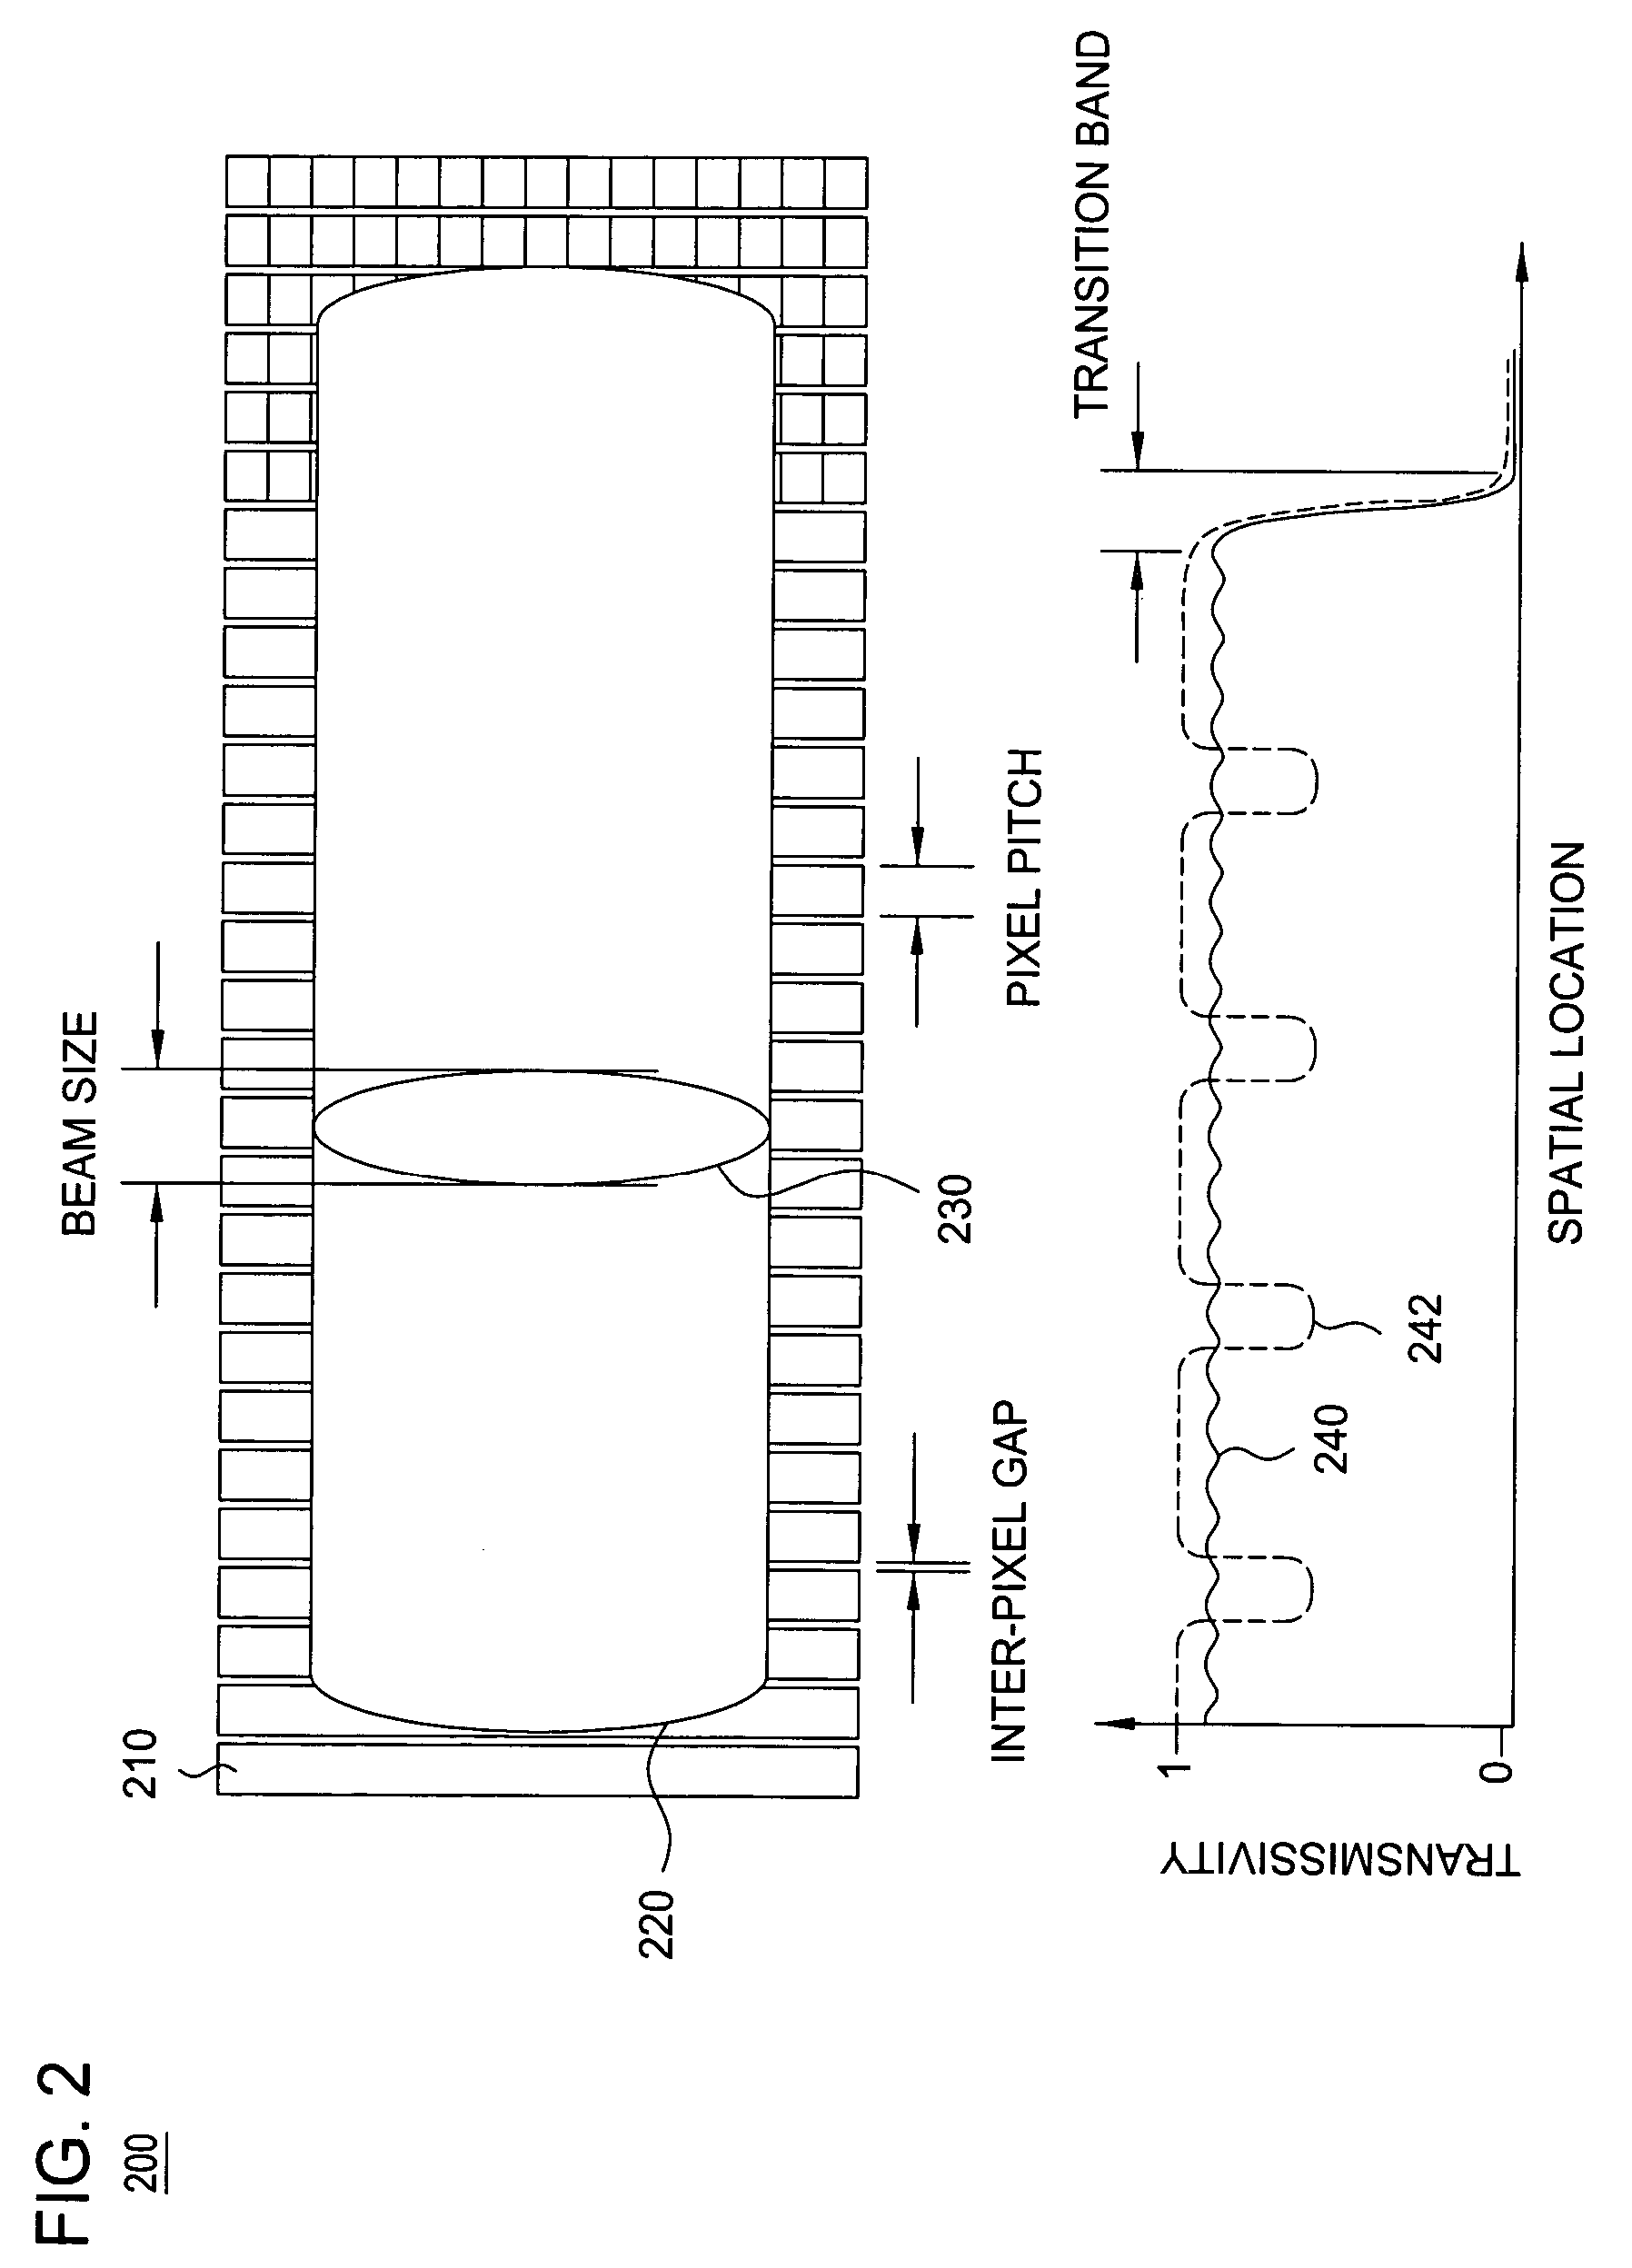 Apparatus for reducing drops in a transmission spectrum due to inter-pixel gaps